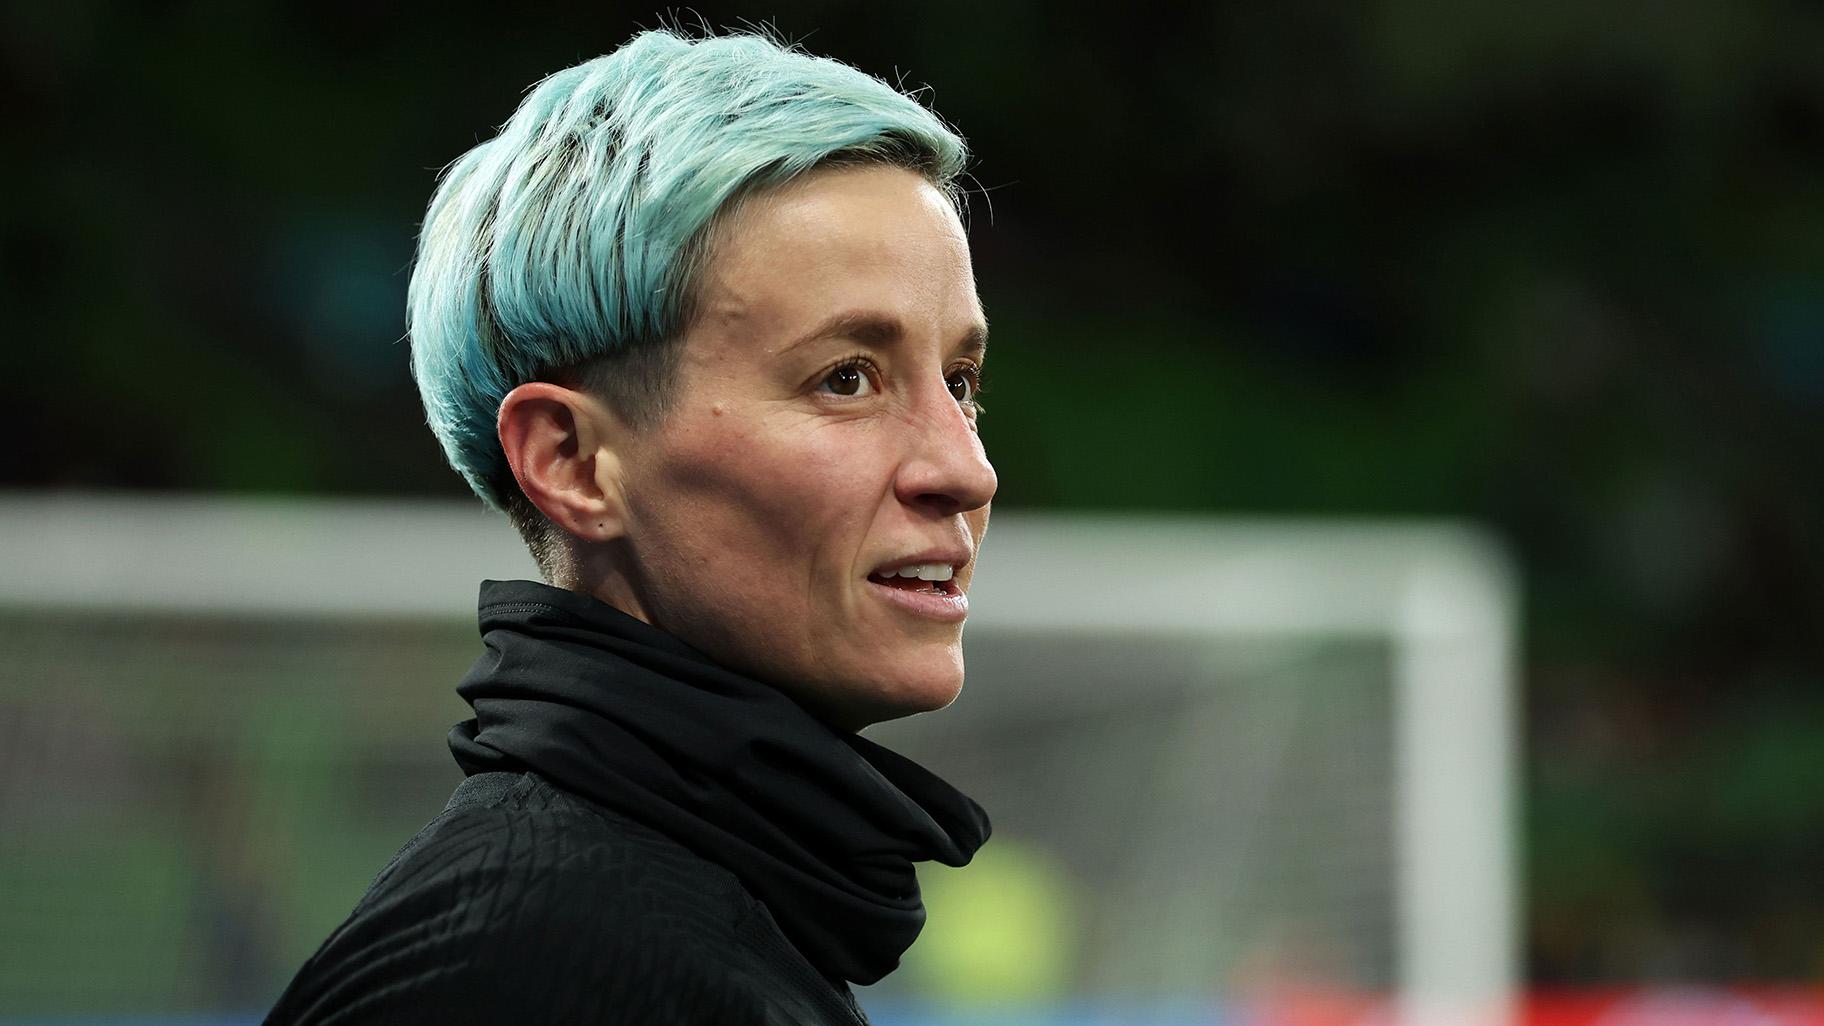 Megan Rapinoe, a two-time Women's World Cup winner, will make her final international appearance for the USWNT in September. (Robert Cianflone / Getty Images via CNN)